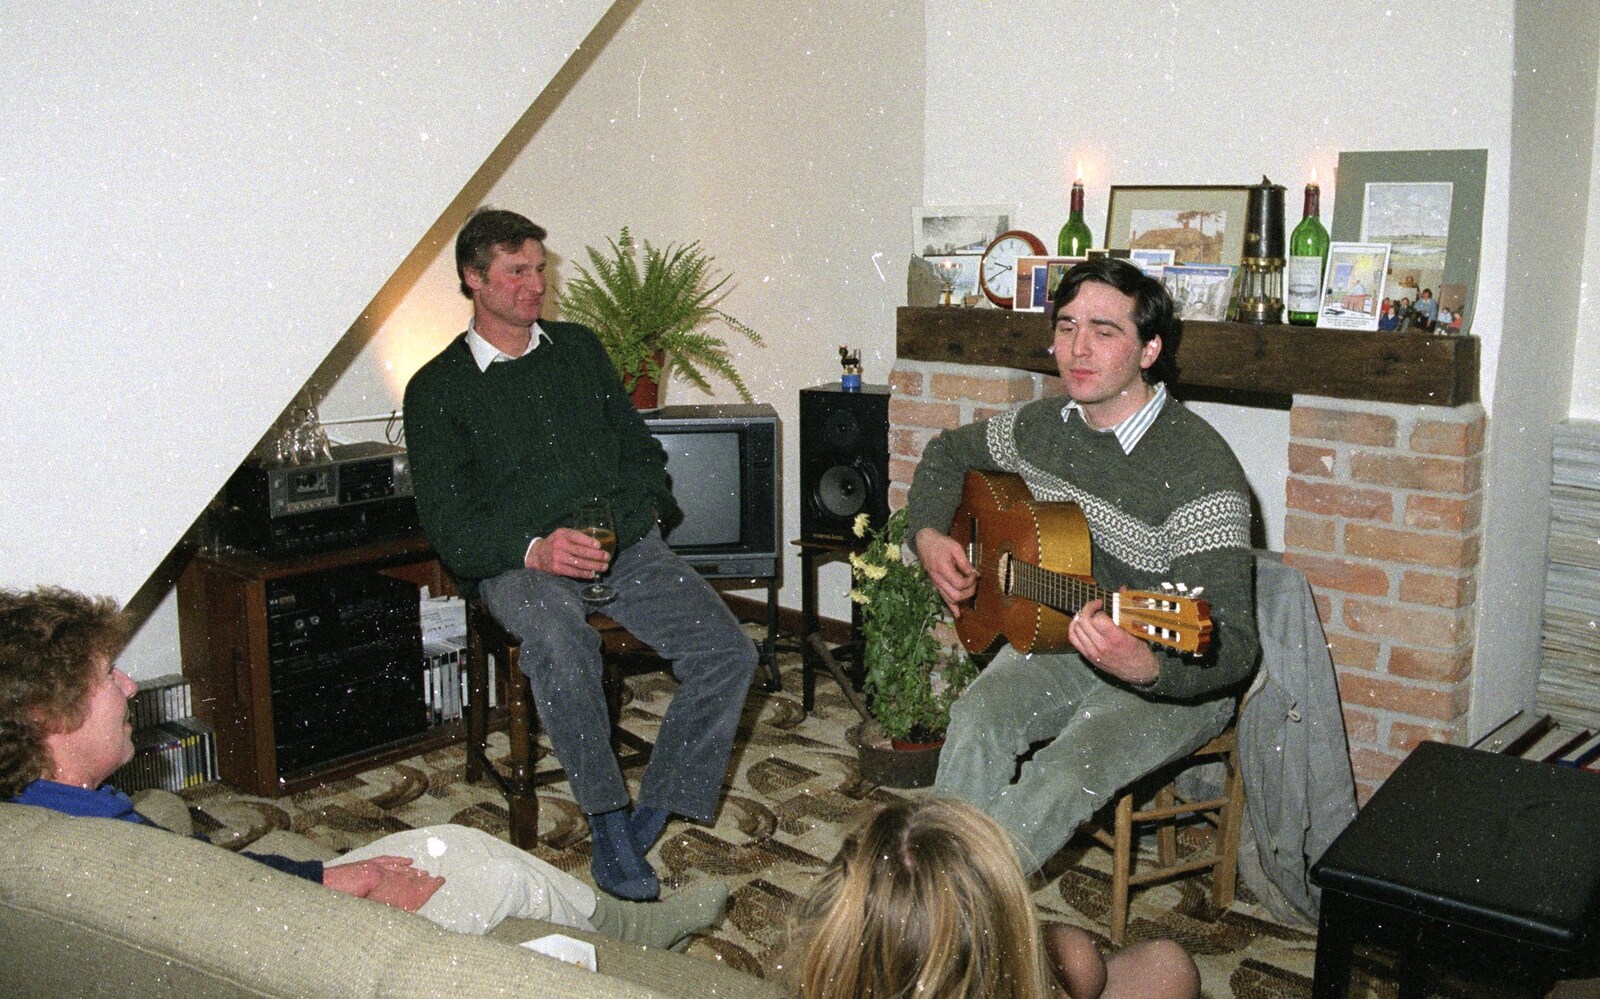 David entertains on guitar from Sledging on the Common and Some Music, Stuston, Suffolk - 5th February 1991